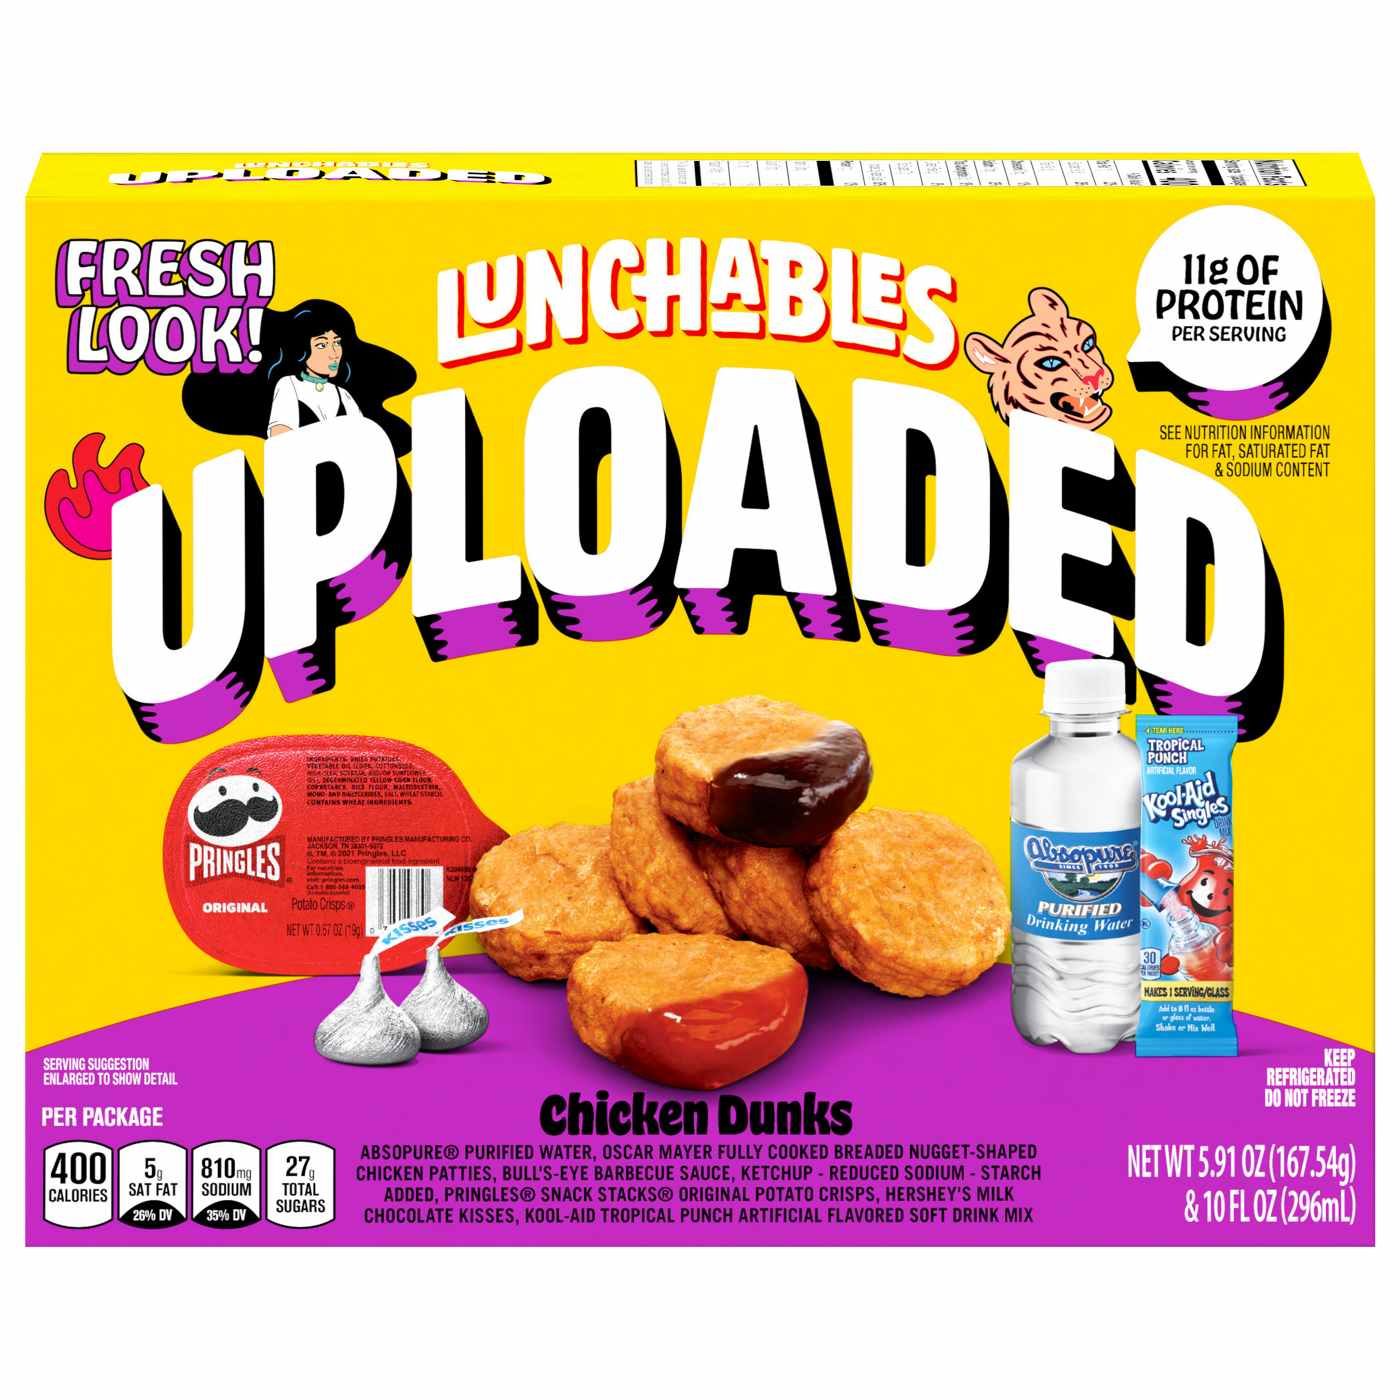 Lunchables Uploaded Meal Kit - Chicken Dunks; image 4 of 5